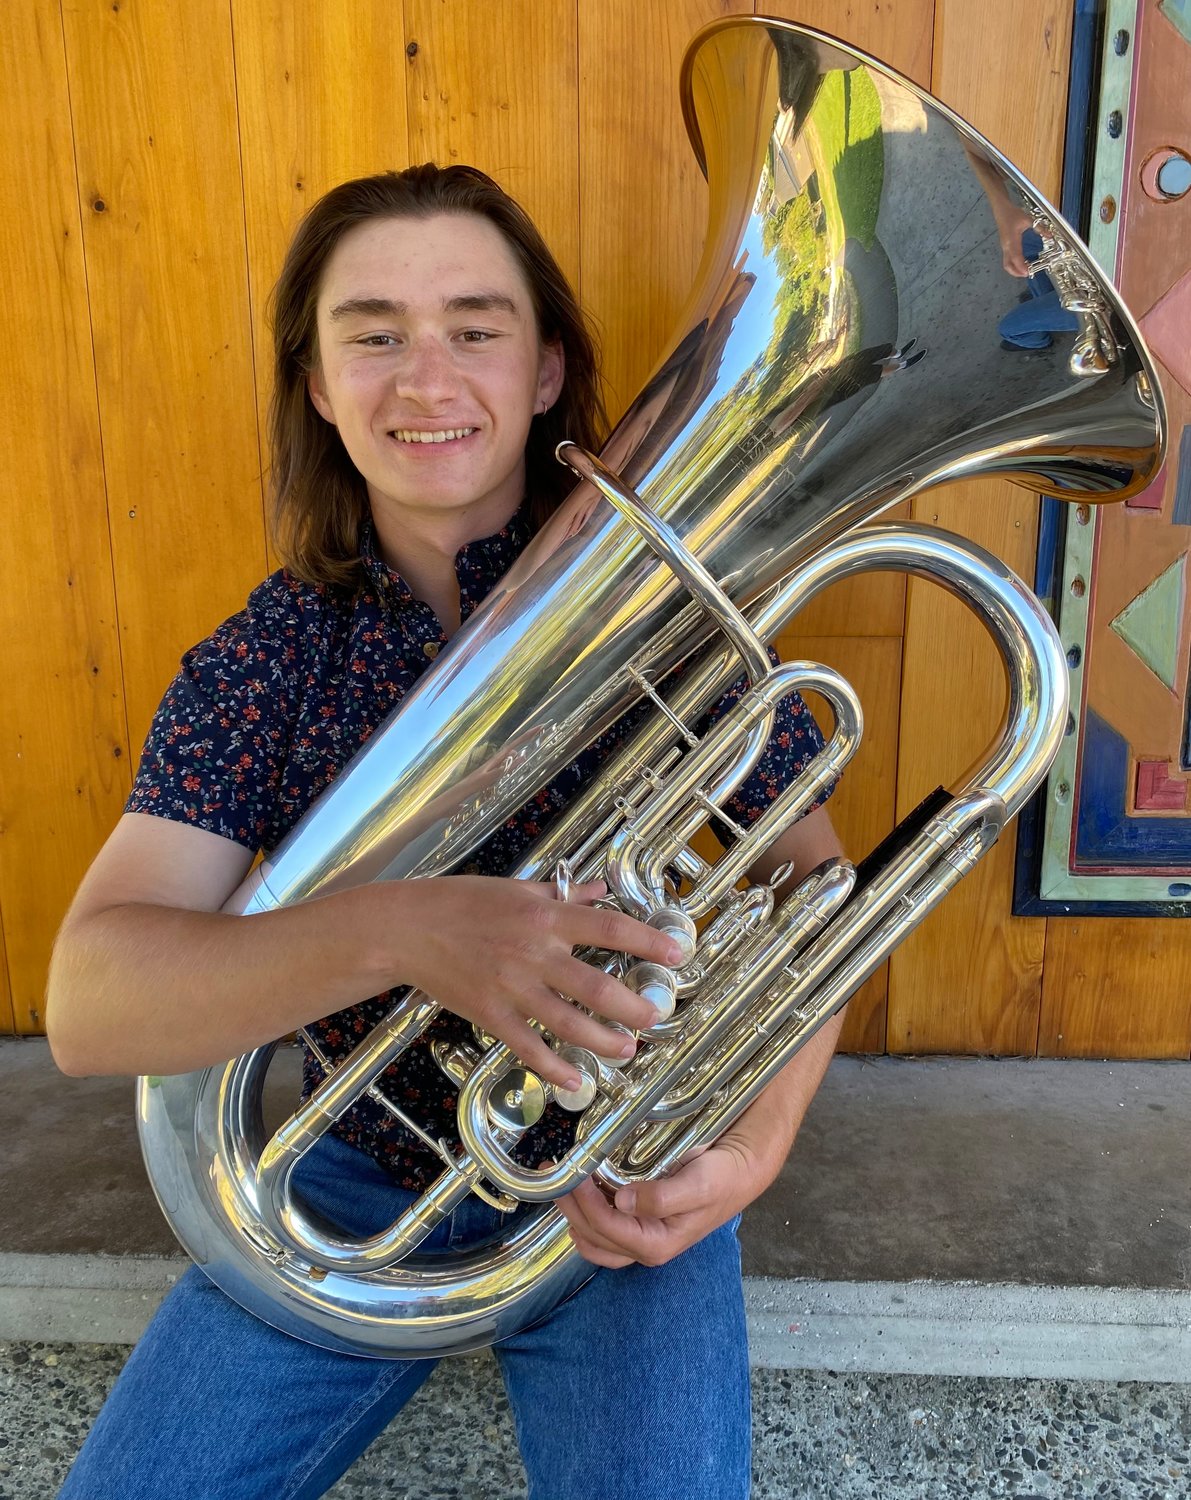 Tim Schrader won first prize for tuba in the 18-23 age division at the 2021 European Music Competition.